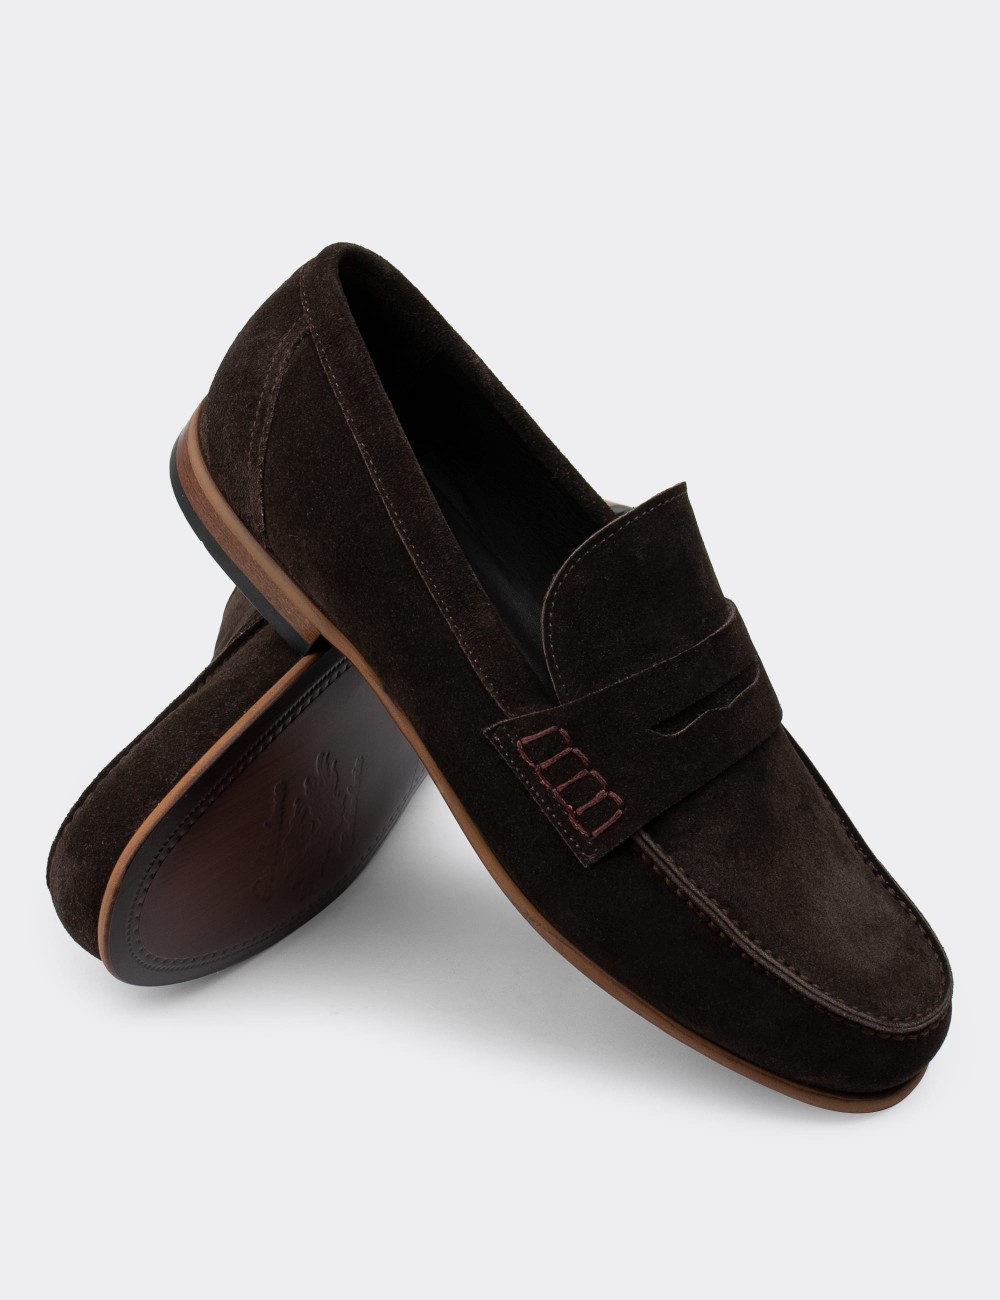 Brown Suede Leather Loafers Shoes - 01538MKHVM02